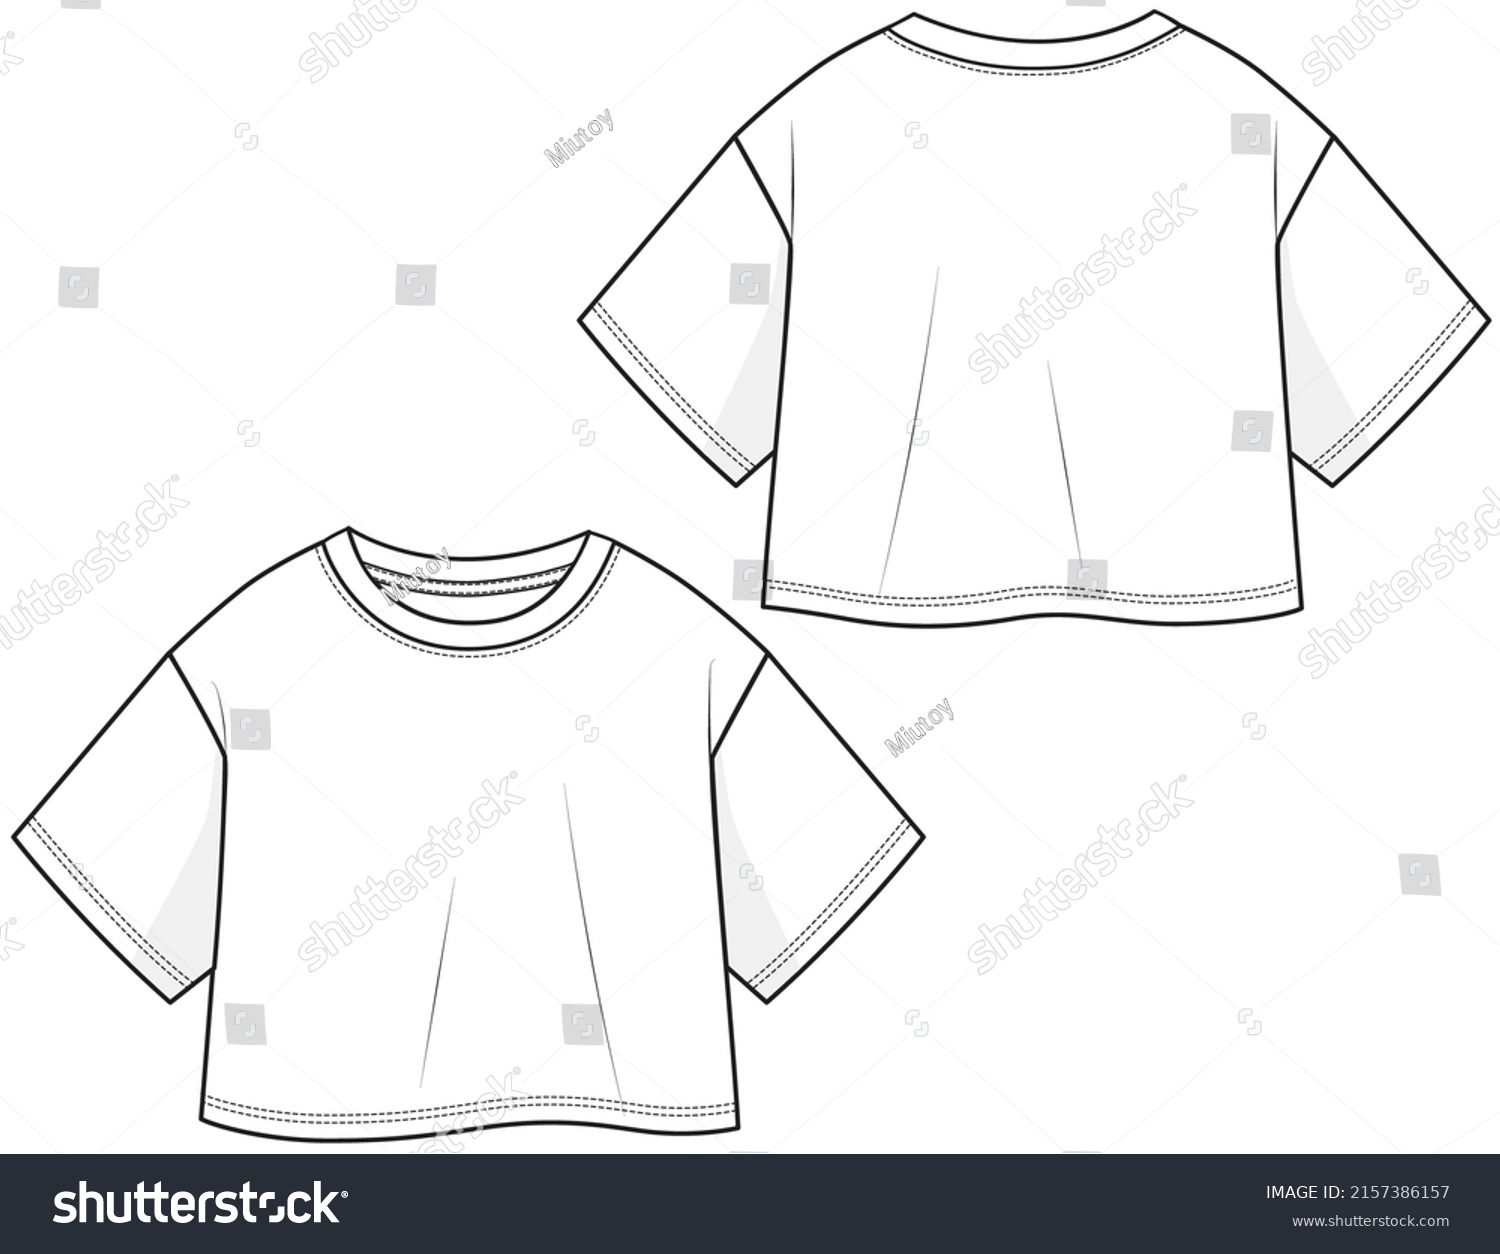 Girls Kids Oversized Cropped T Shirt Stock Vector (Royalty Free ...